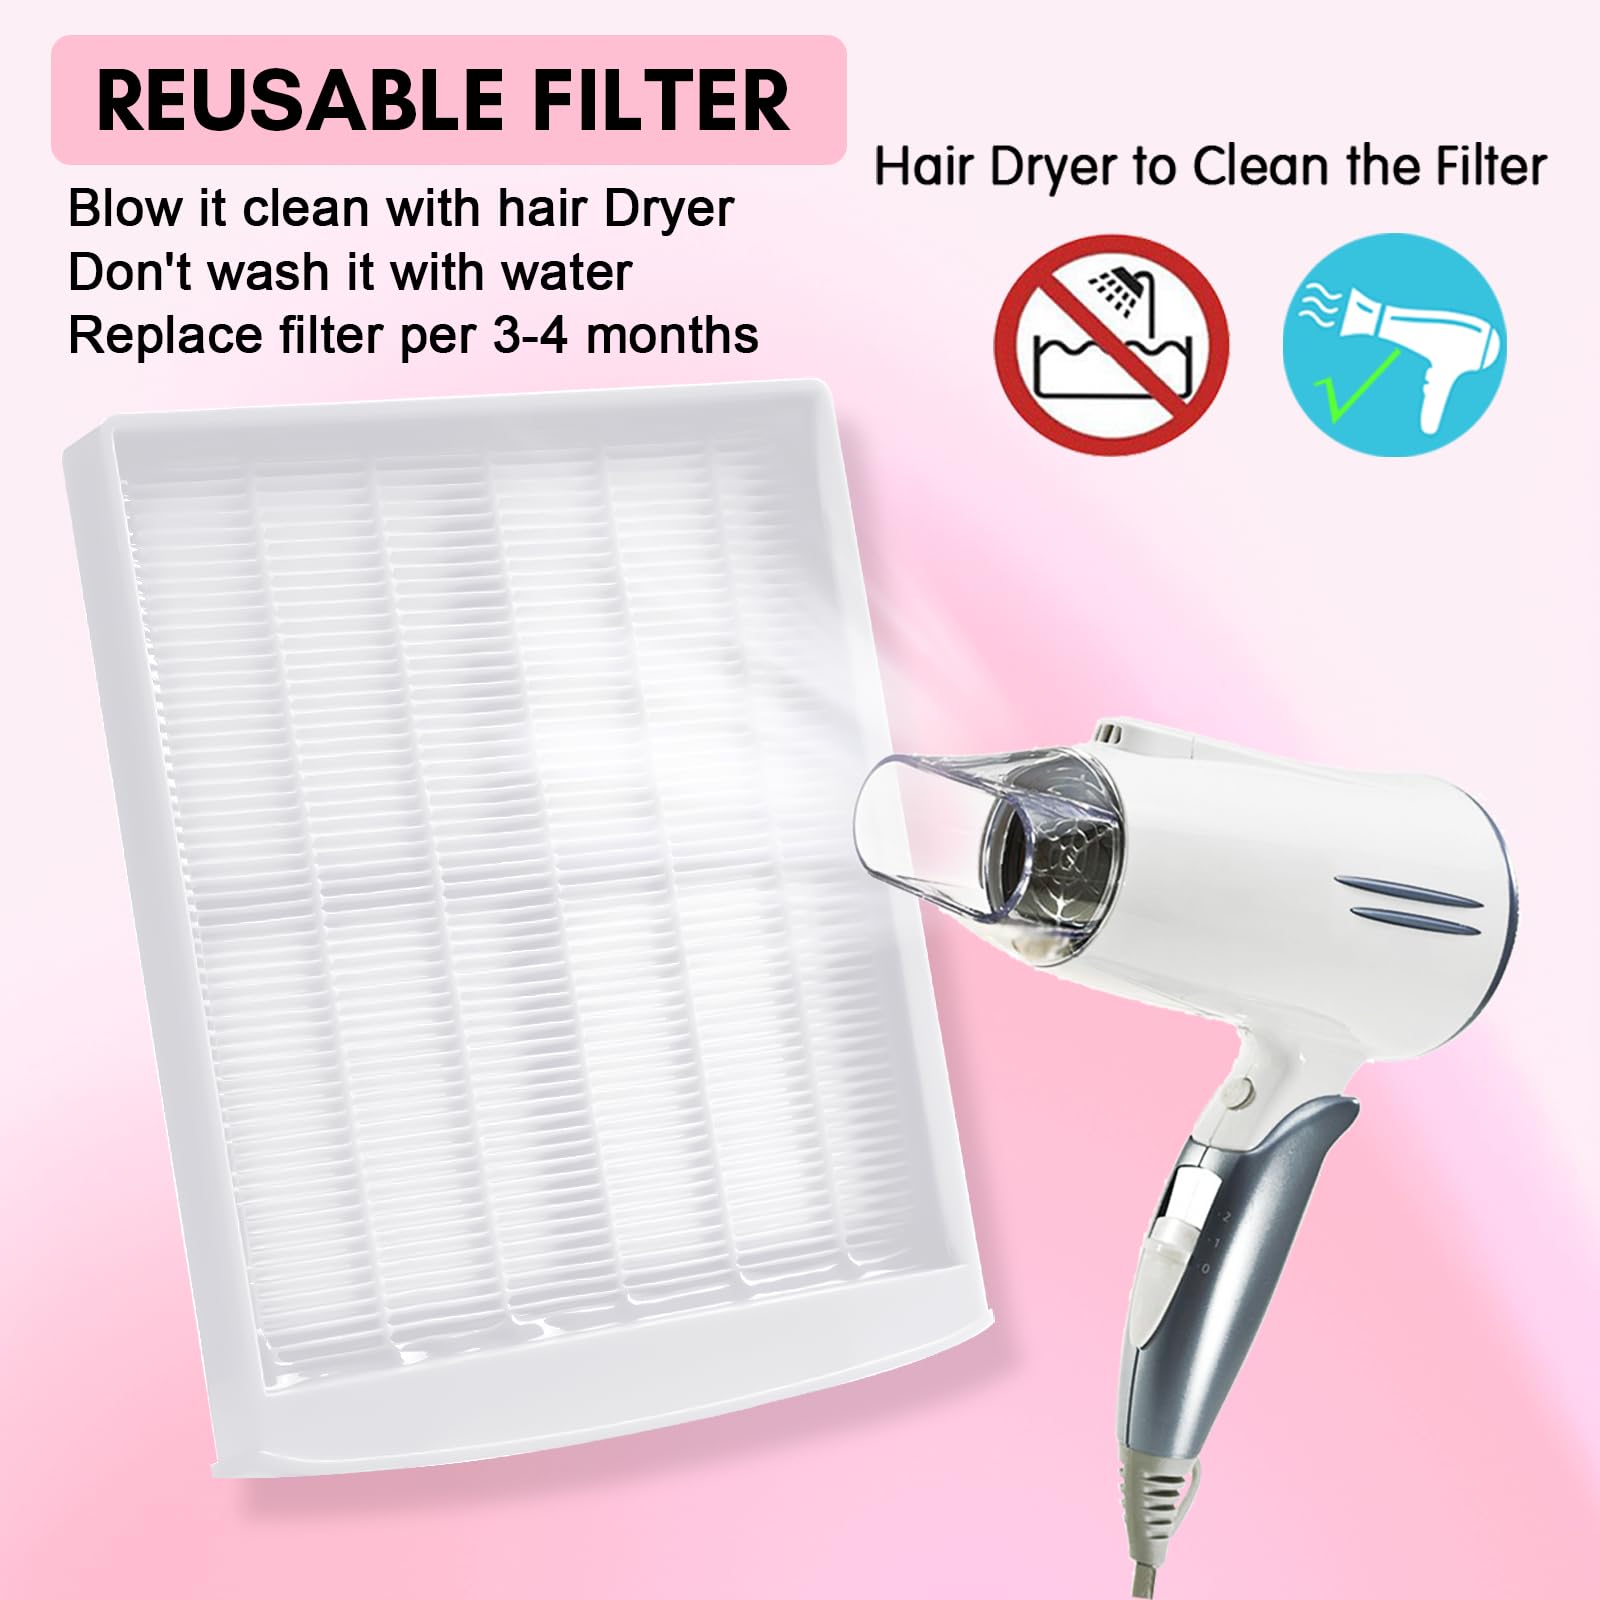 Nail Dust Collector Filter No-Spilling Filter for MK200